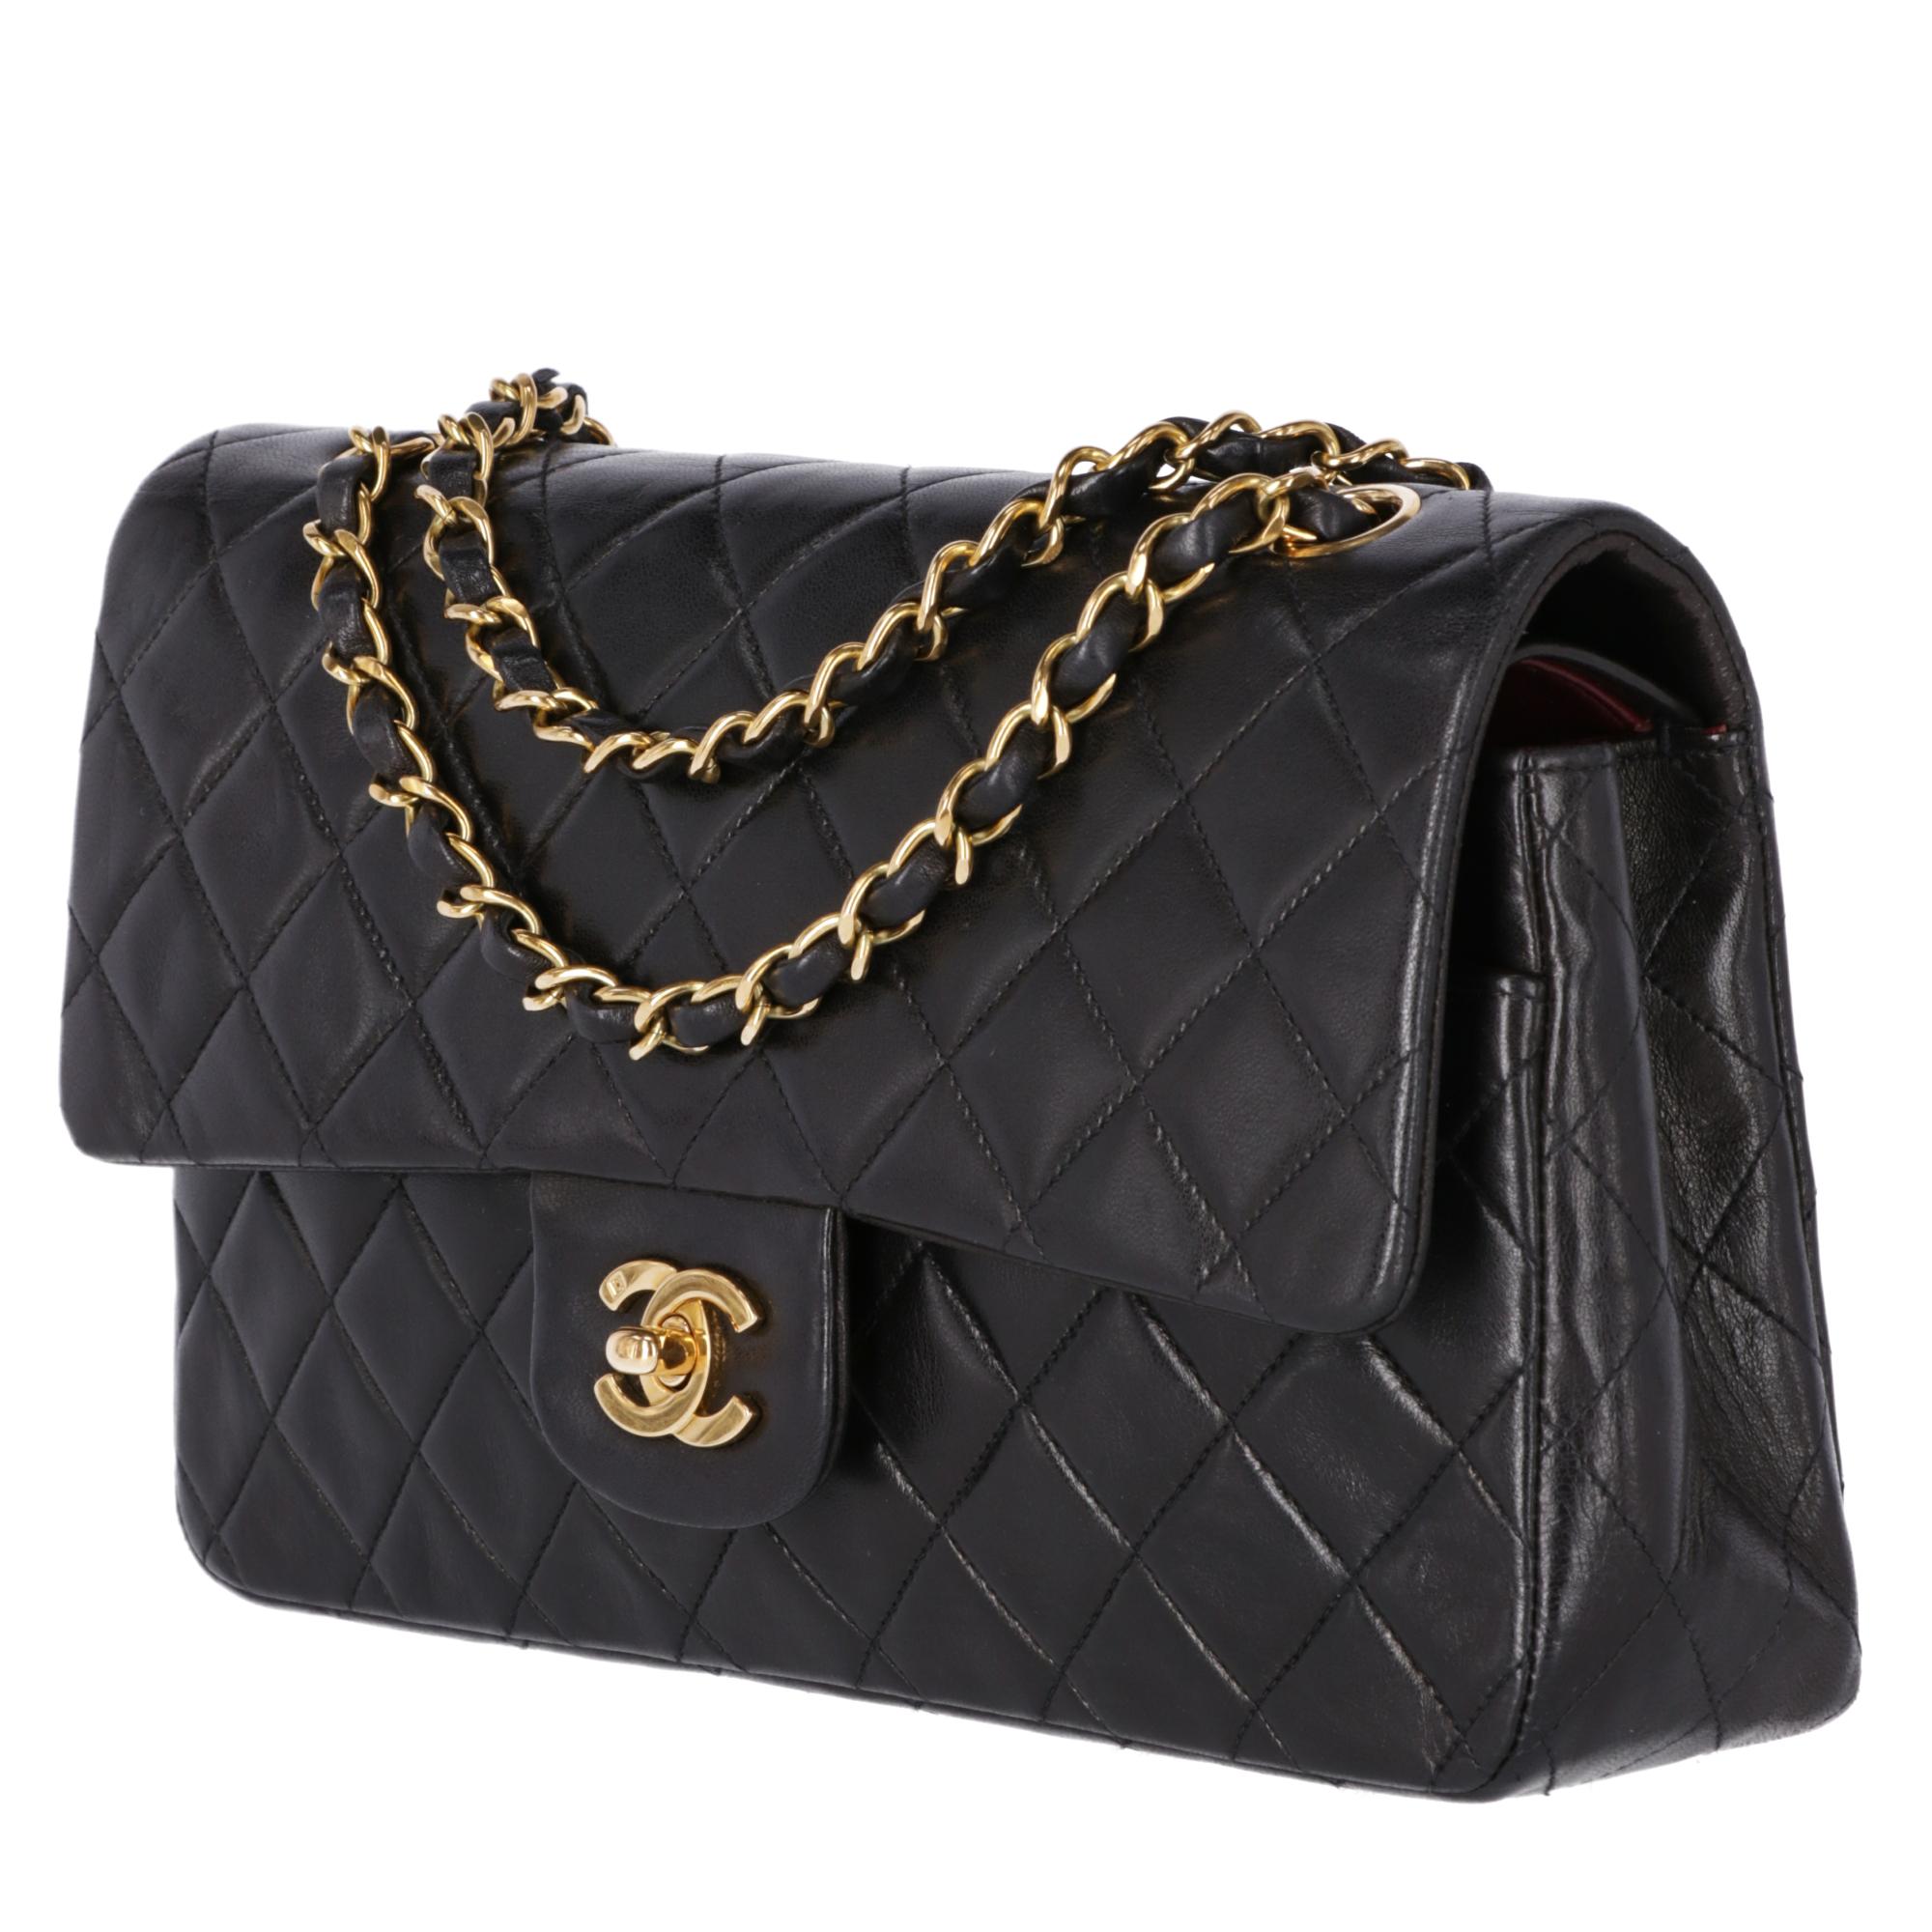 Chanel 2.55 bag 25 cm black bag with diamond matelassè lamb leather and gold tone chain with intertwine black leather. Internal flap with press stud and internal patch pockets.

The item shows lightly signs of utilization, as in pictures.

Made in